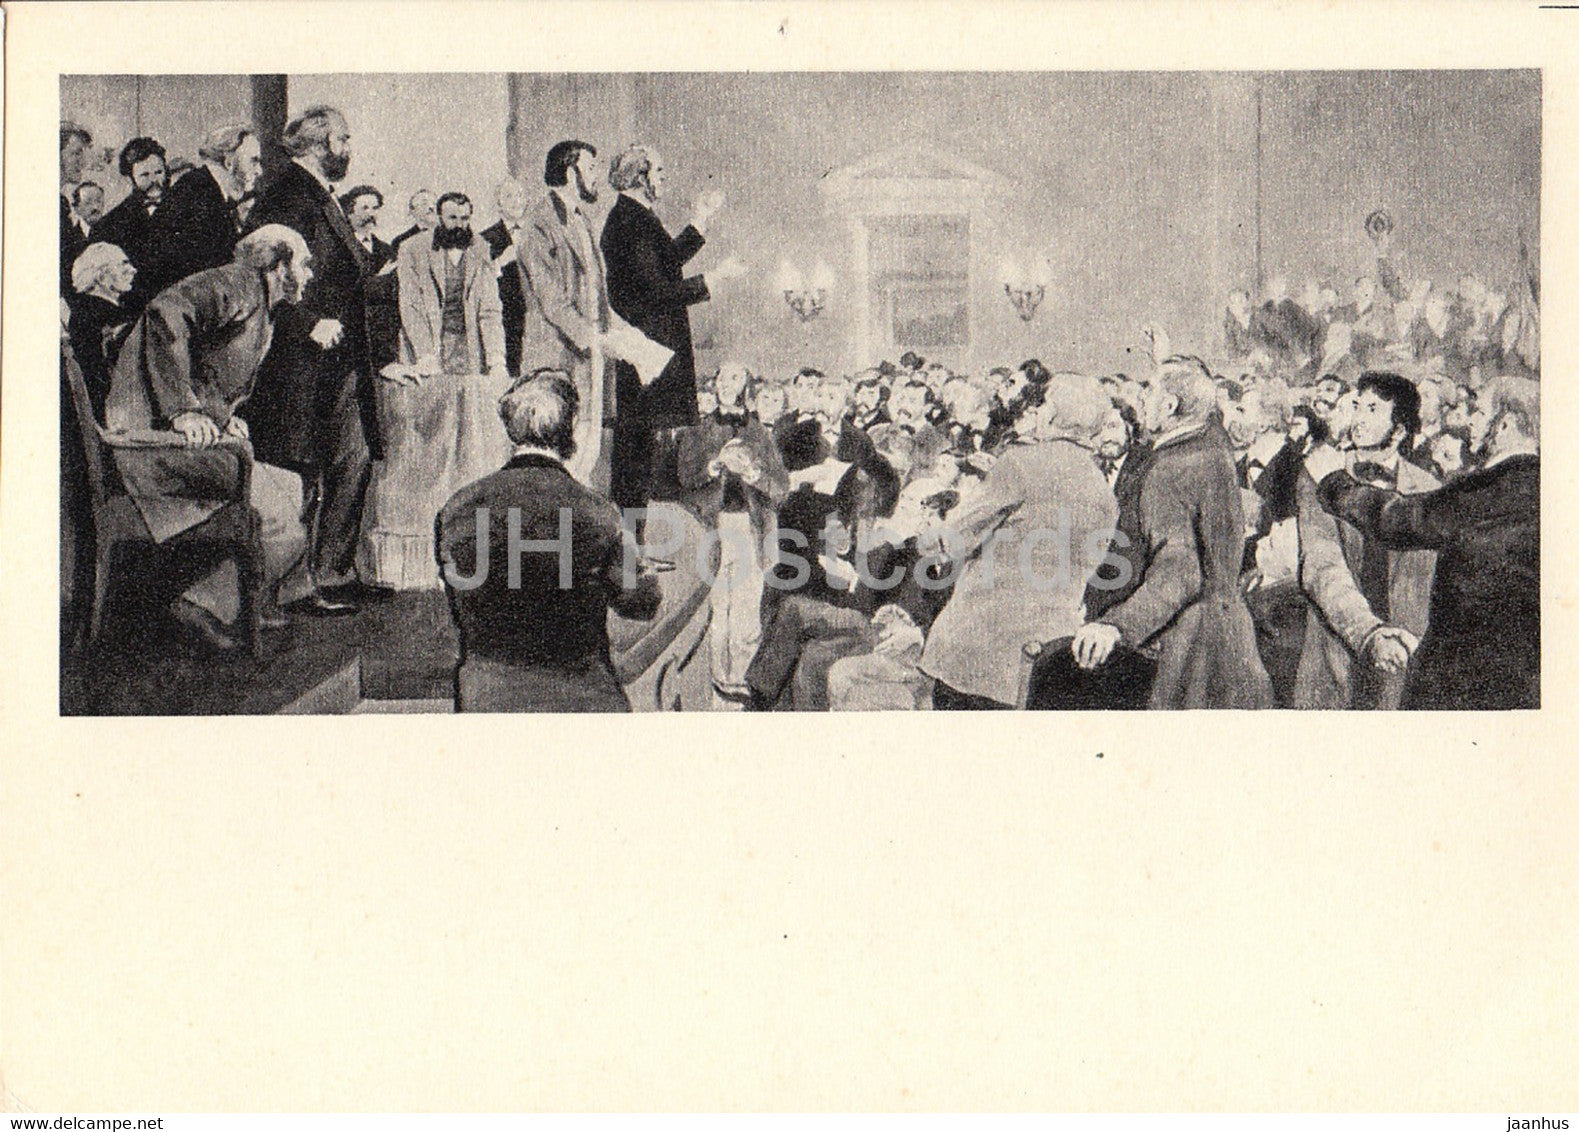 Karl Marx at a rally in London where the I International was founded 1864 - 1967 - Russia USSR - unused - JH Postcards